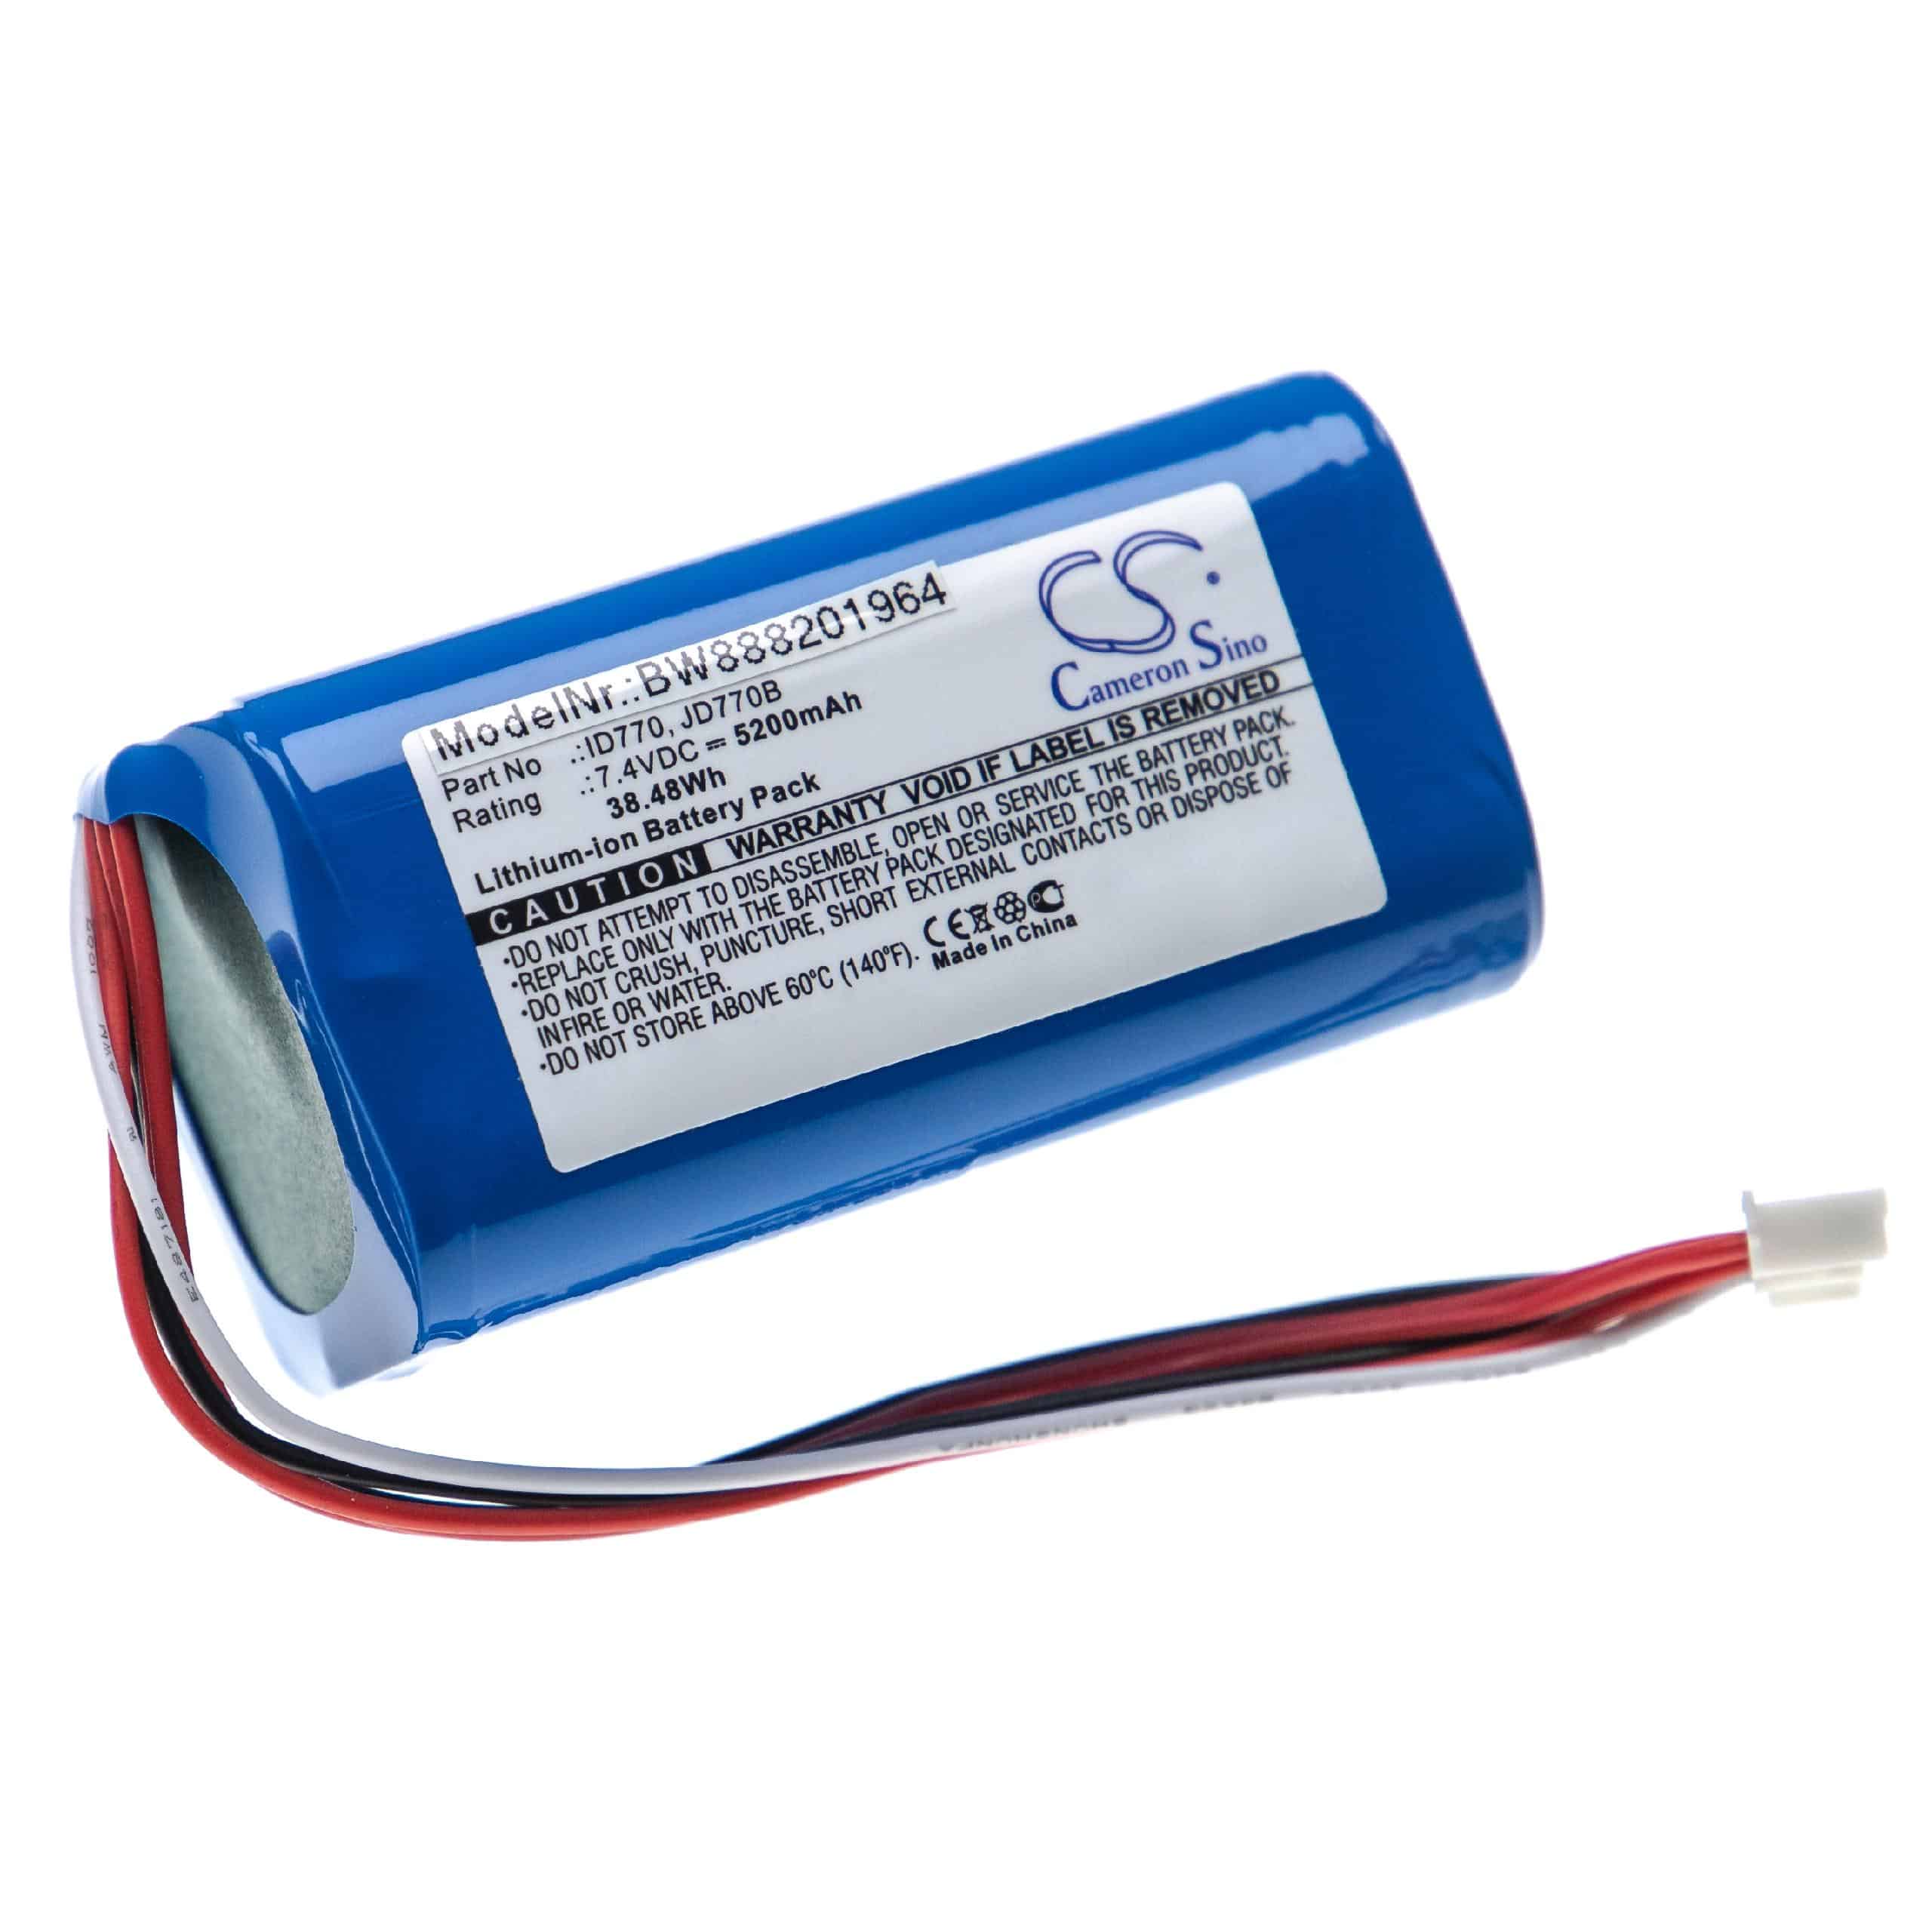  Battery replaces Sony ID770, JD770B for SonyLoudspeaker - Li-Ion 5200 mAh 4 cells